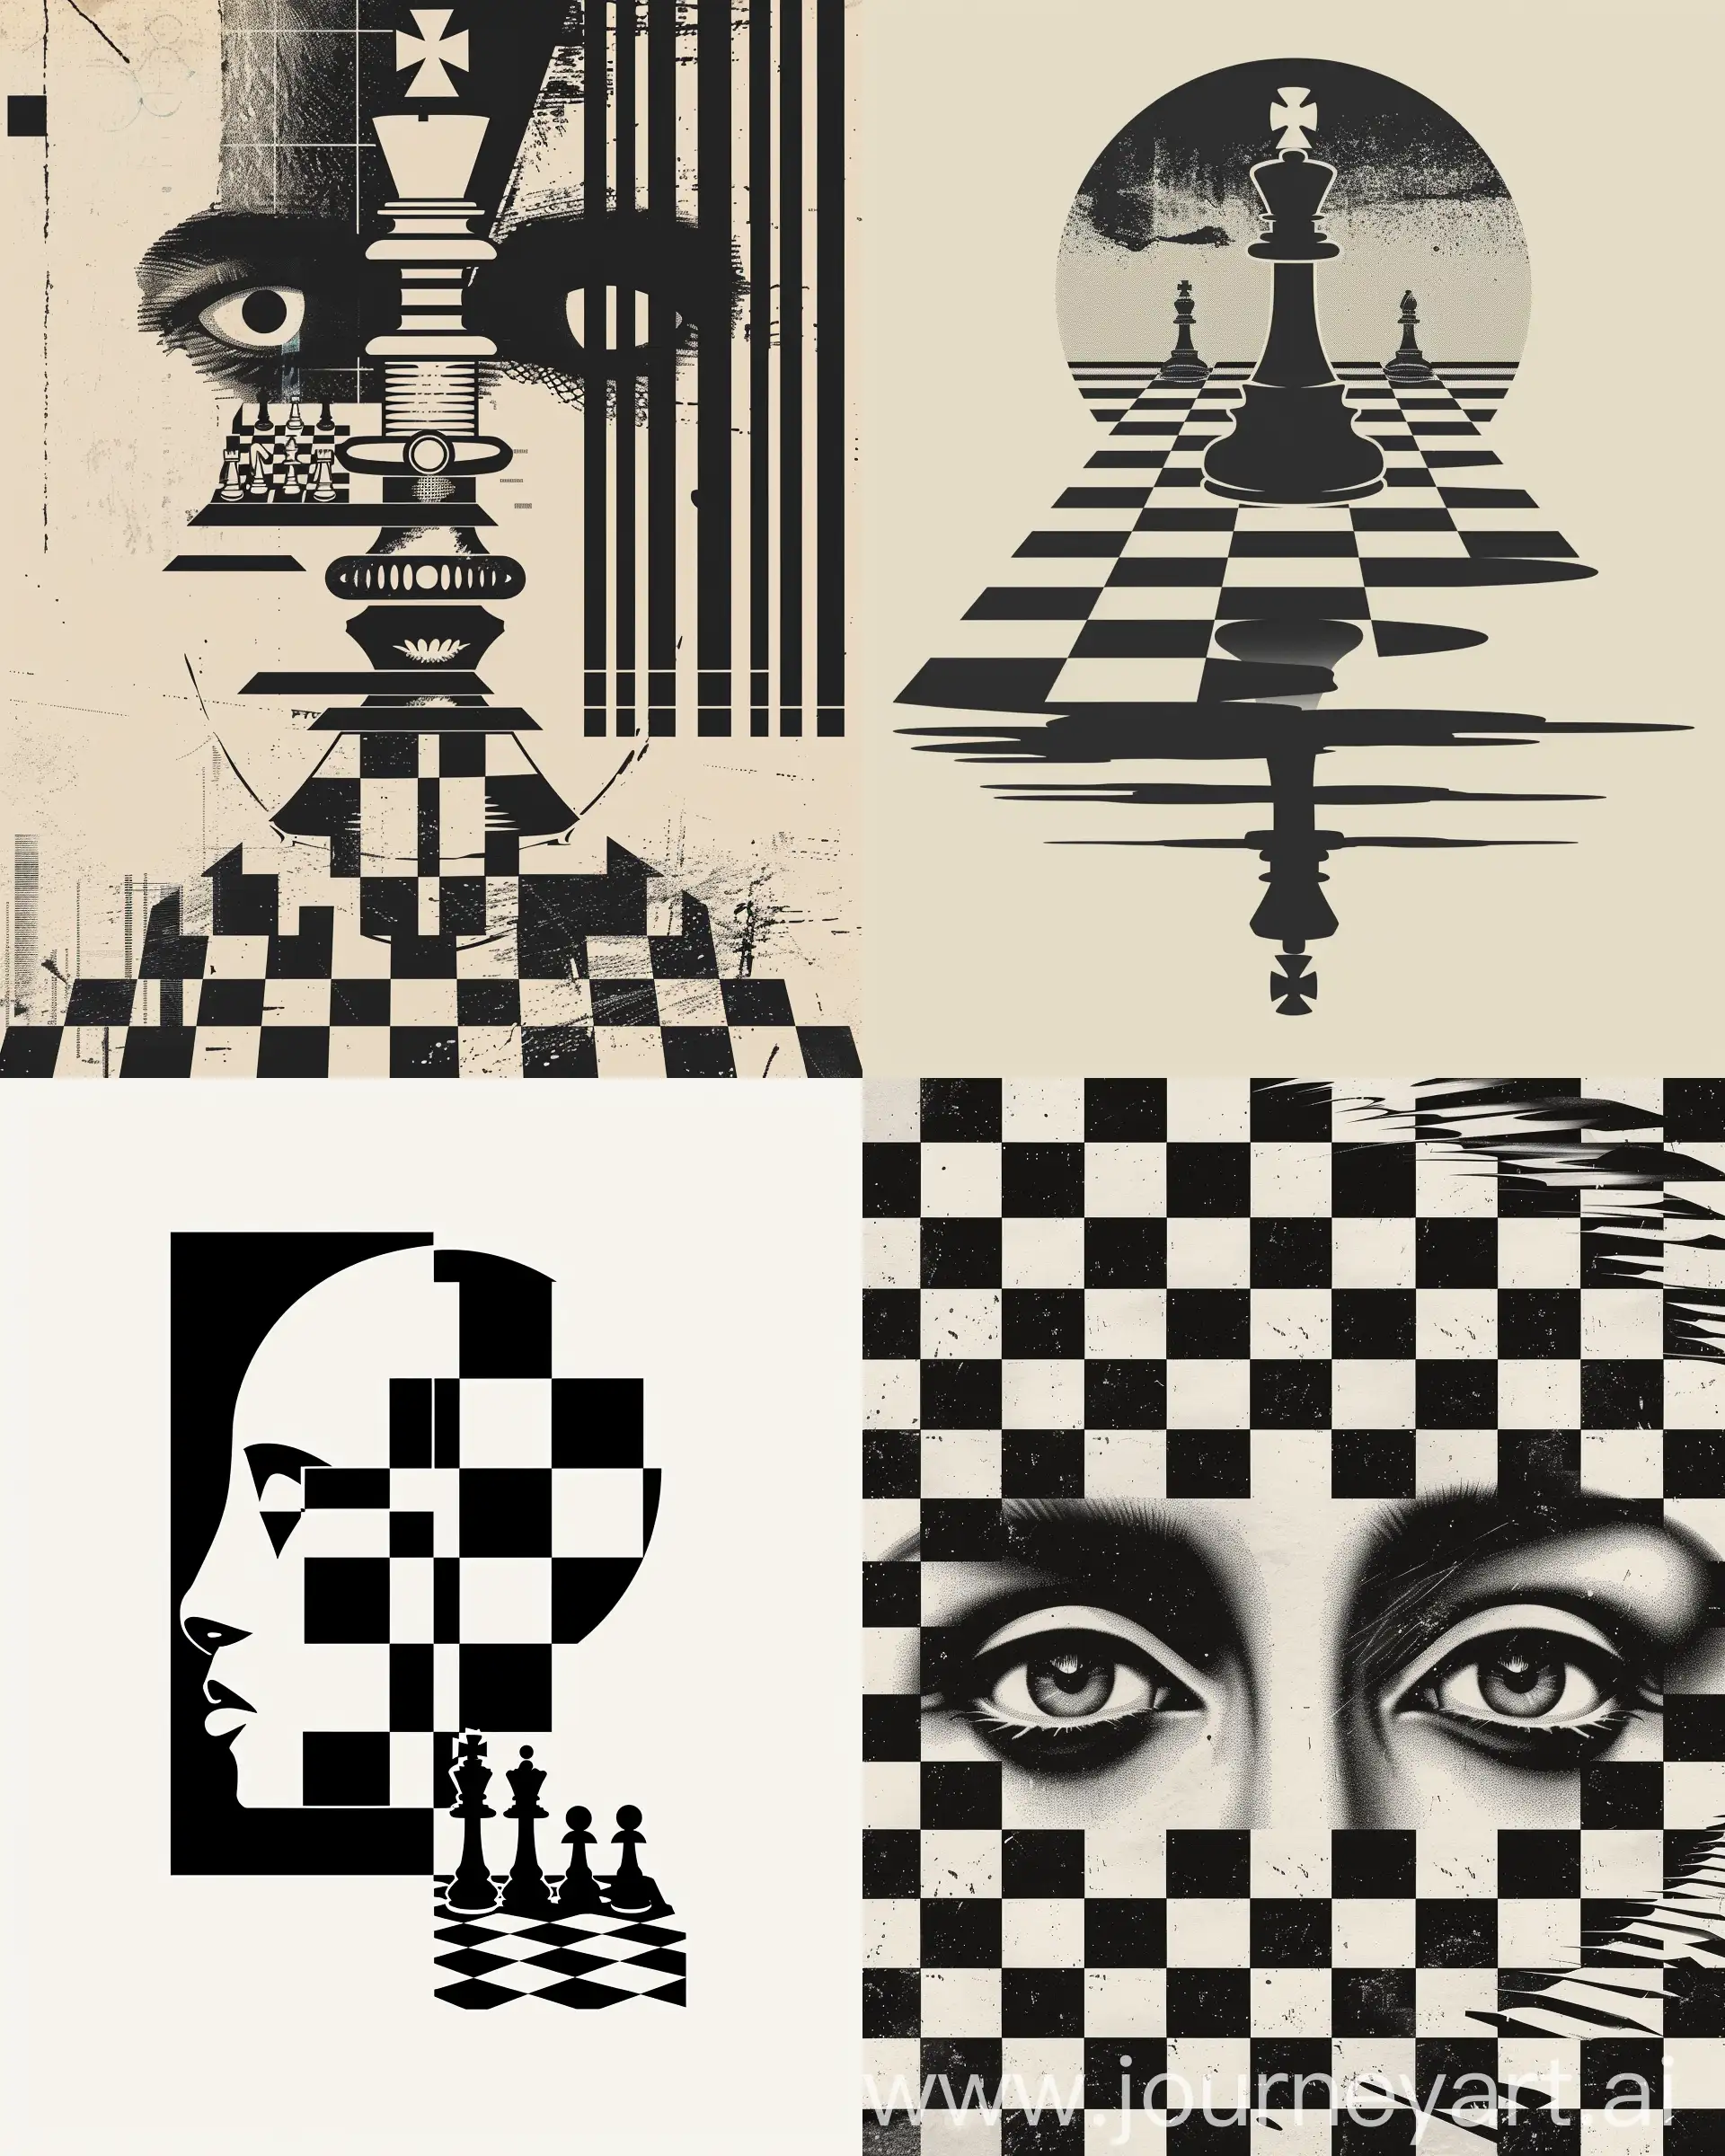 post modernism logo design, The echo of philosophical thought, surrealism, dadaism, artistc, visual illusion, chessboard  --ar 4:5